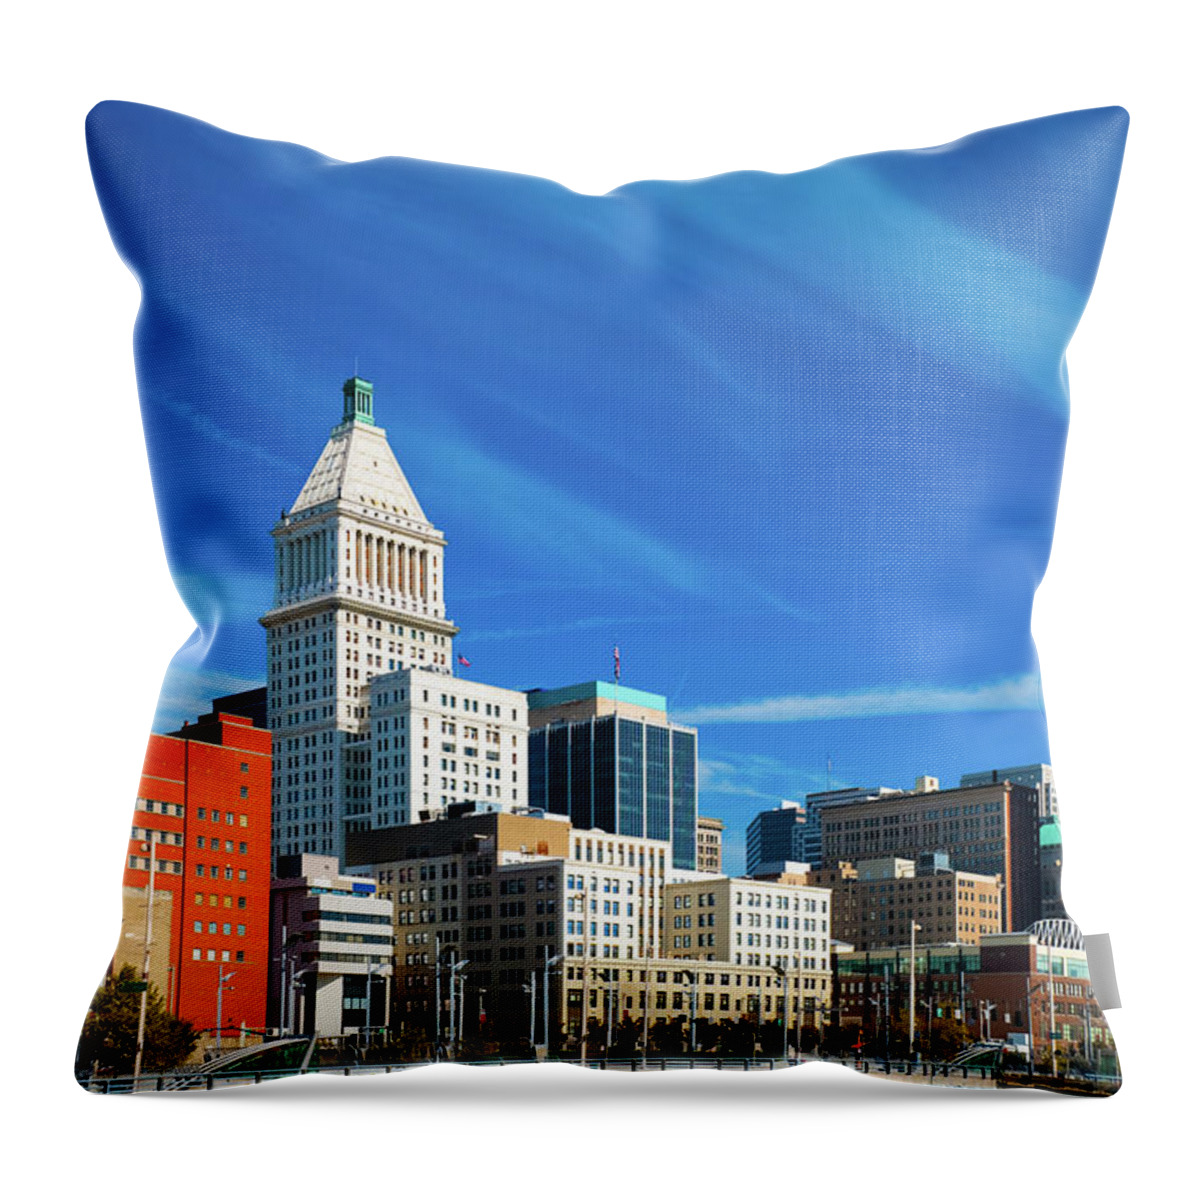 Downtown District Throw Pillow featuring the photograph Cincinnati Downtown Buildings by Davel5957